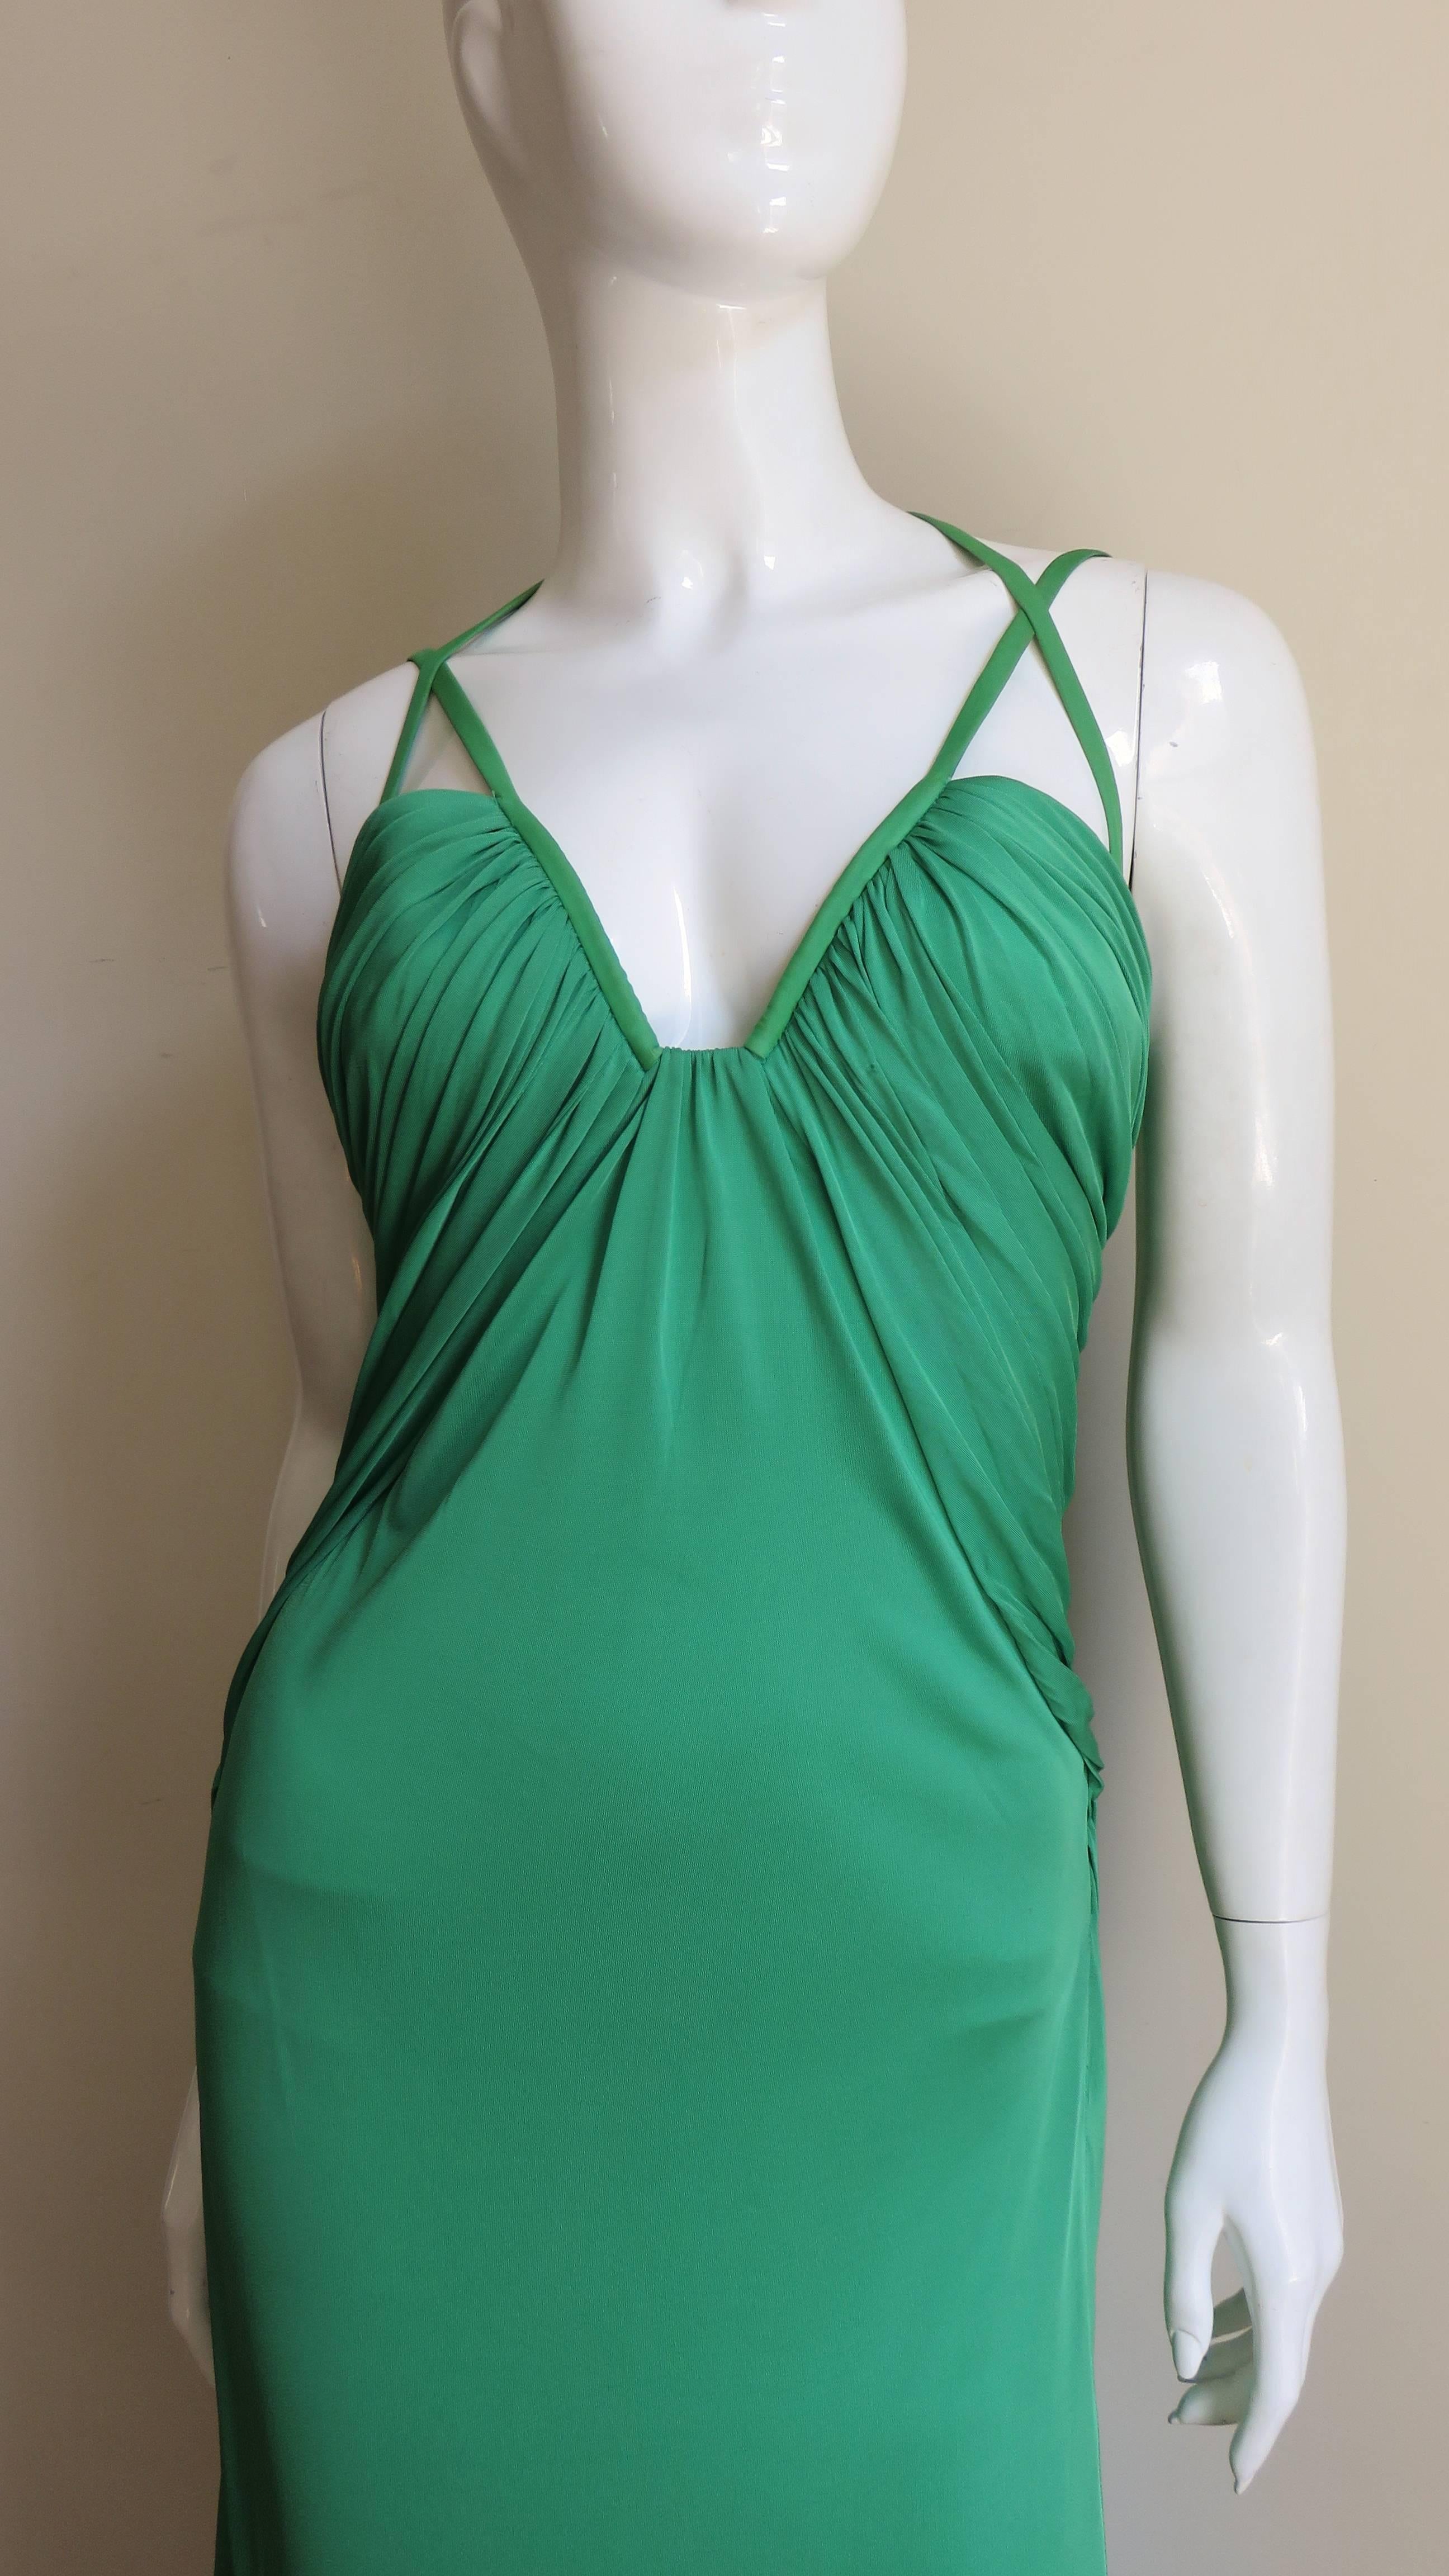 A fabulous gown in emerald green silk knit from Versace.  It has a squared off ruched sweetheart neckline with formed bust cups and piped edges that turn into shoulder straps and a strap that crosses them and goes around the neck.  The bust ruching